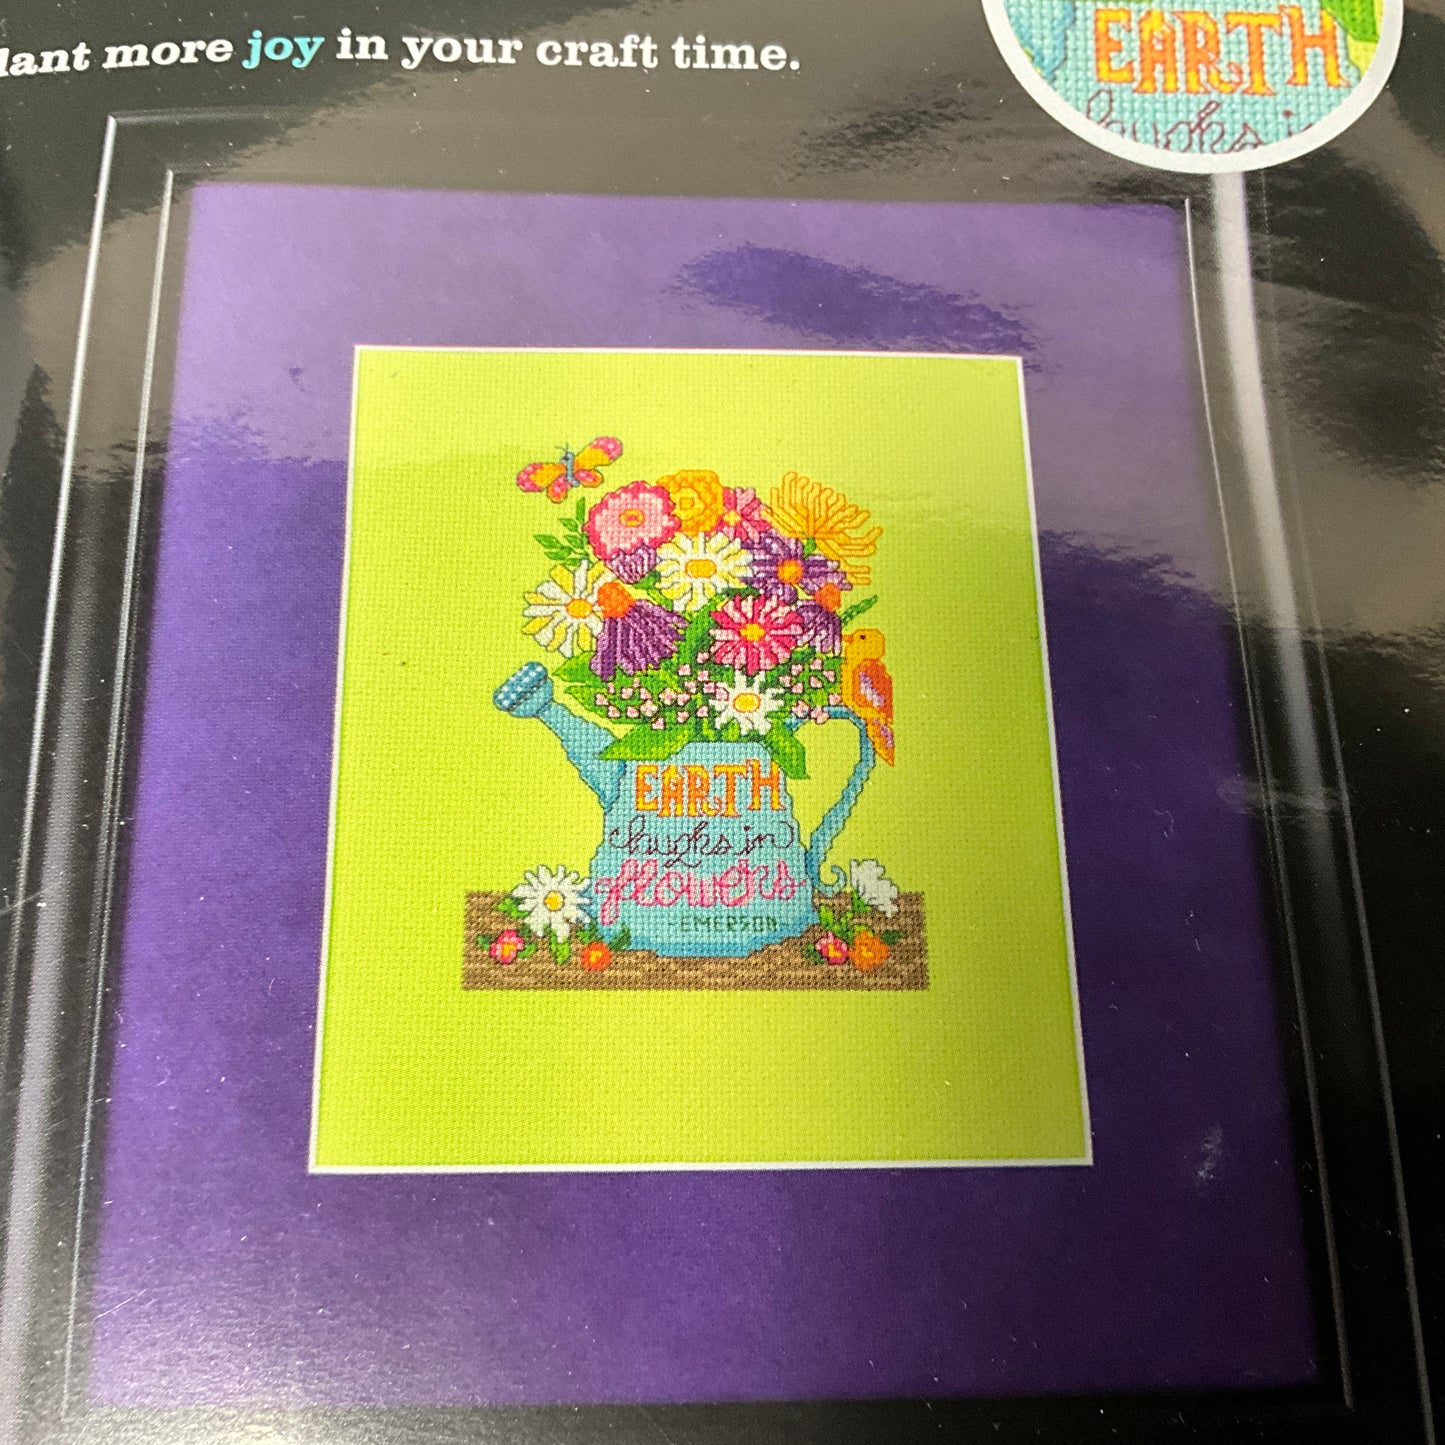 Zweigart Artiste Plant more joy in your chat time 1289345 2015 counted cross stitch kit*